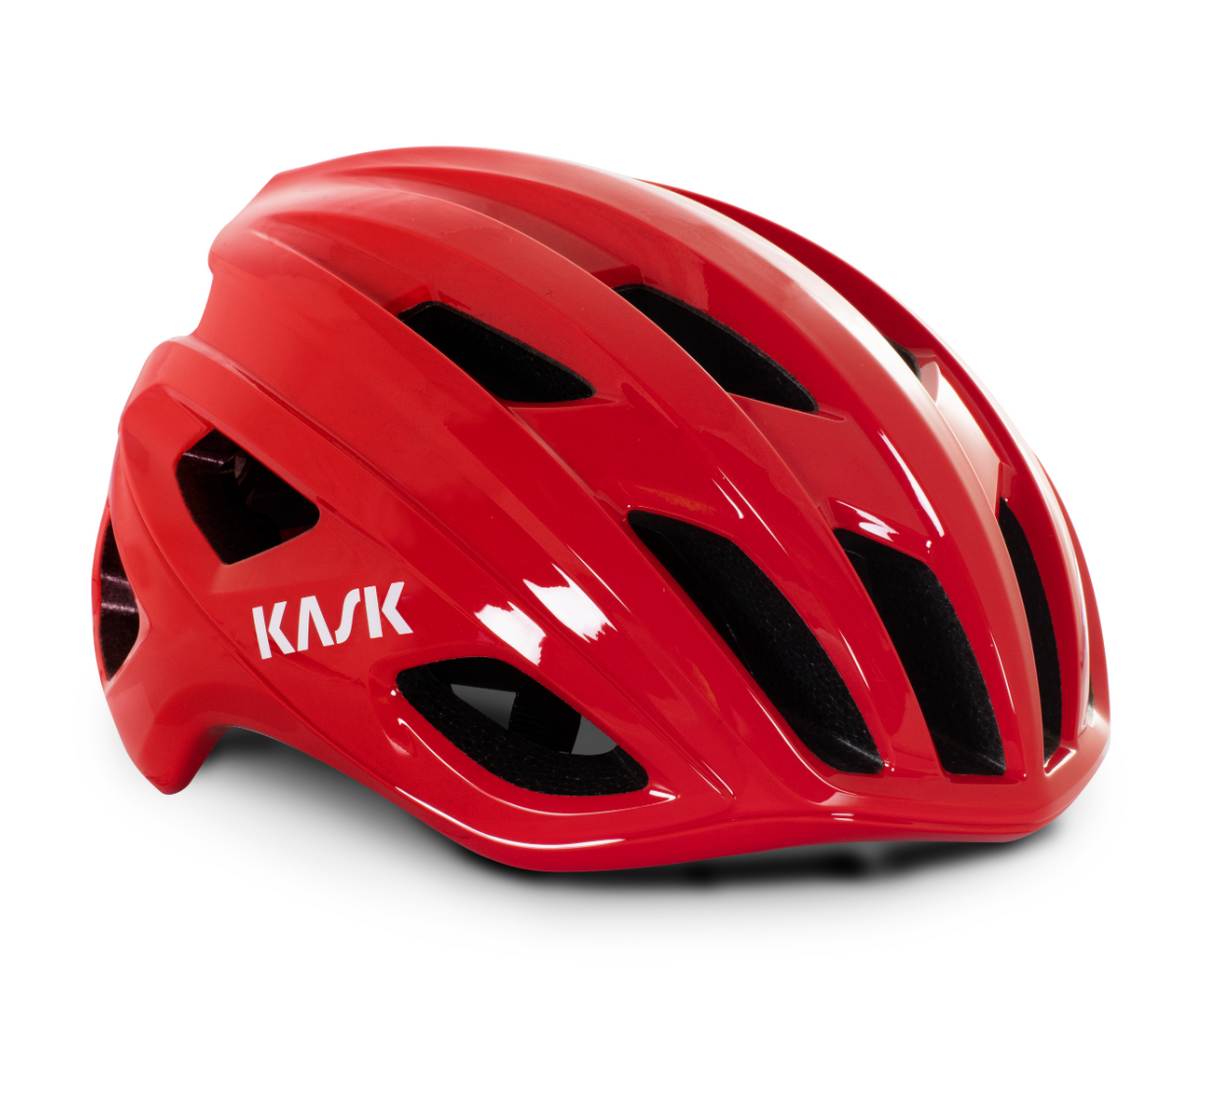 KASK Cycling Helmet- MOJITO CUBED-Red Size Medium